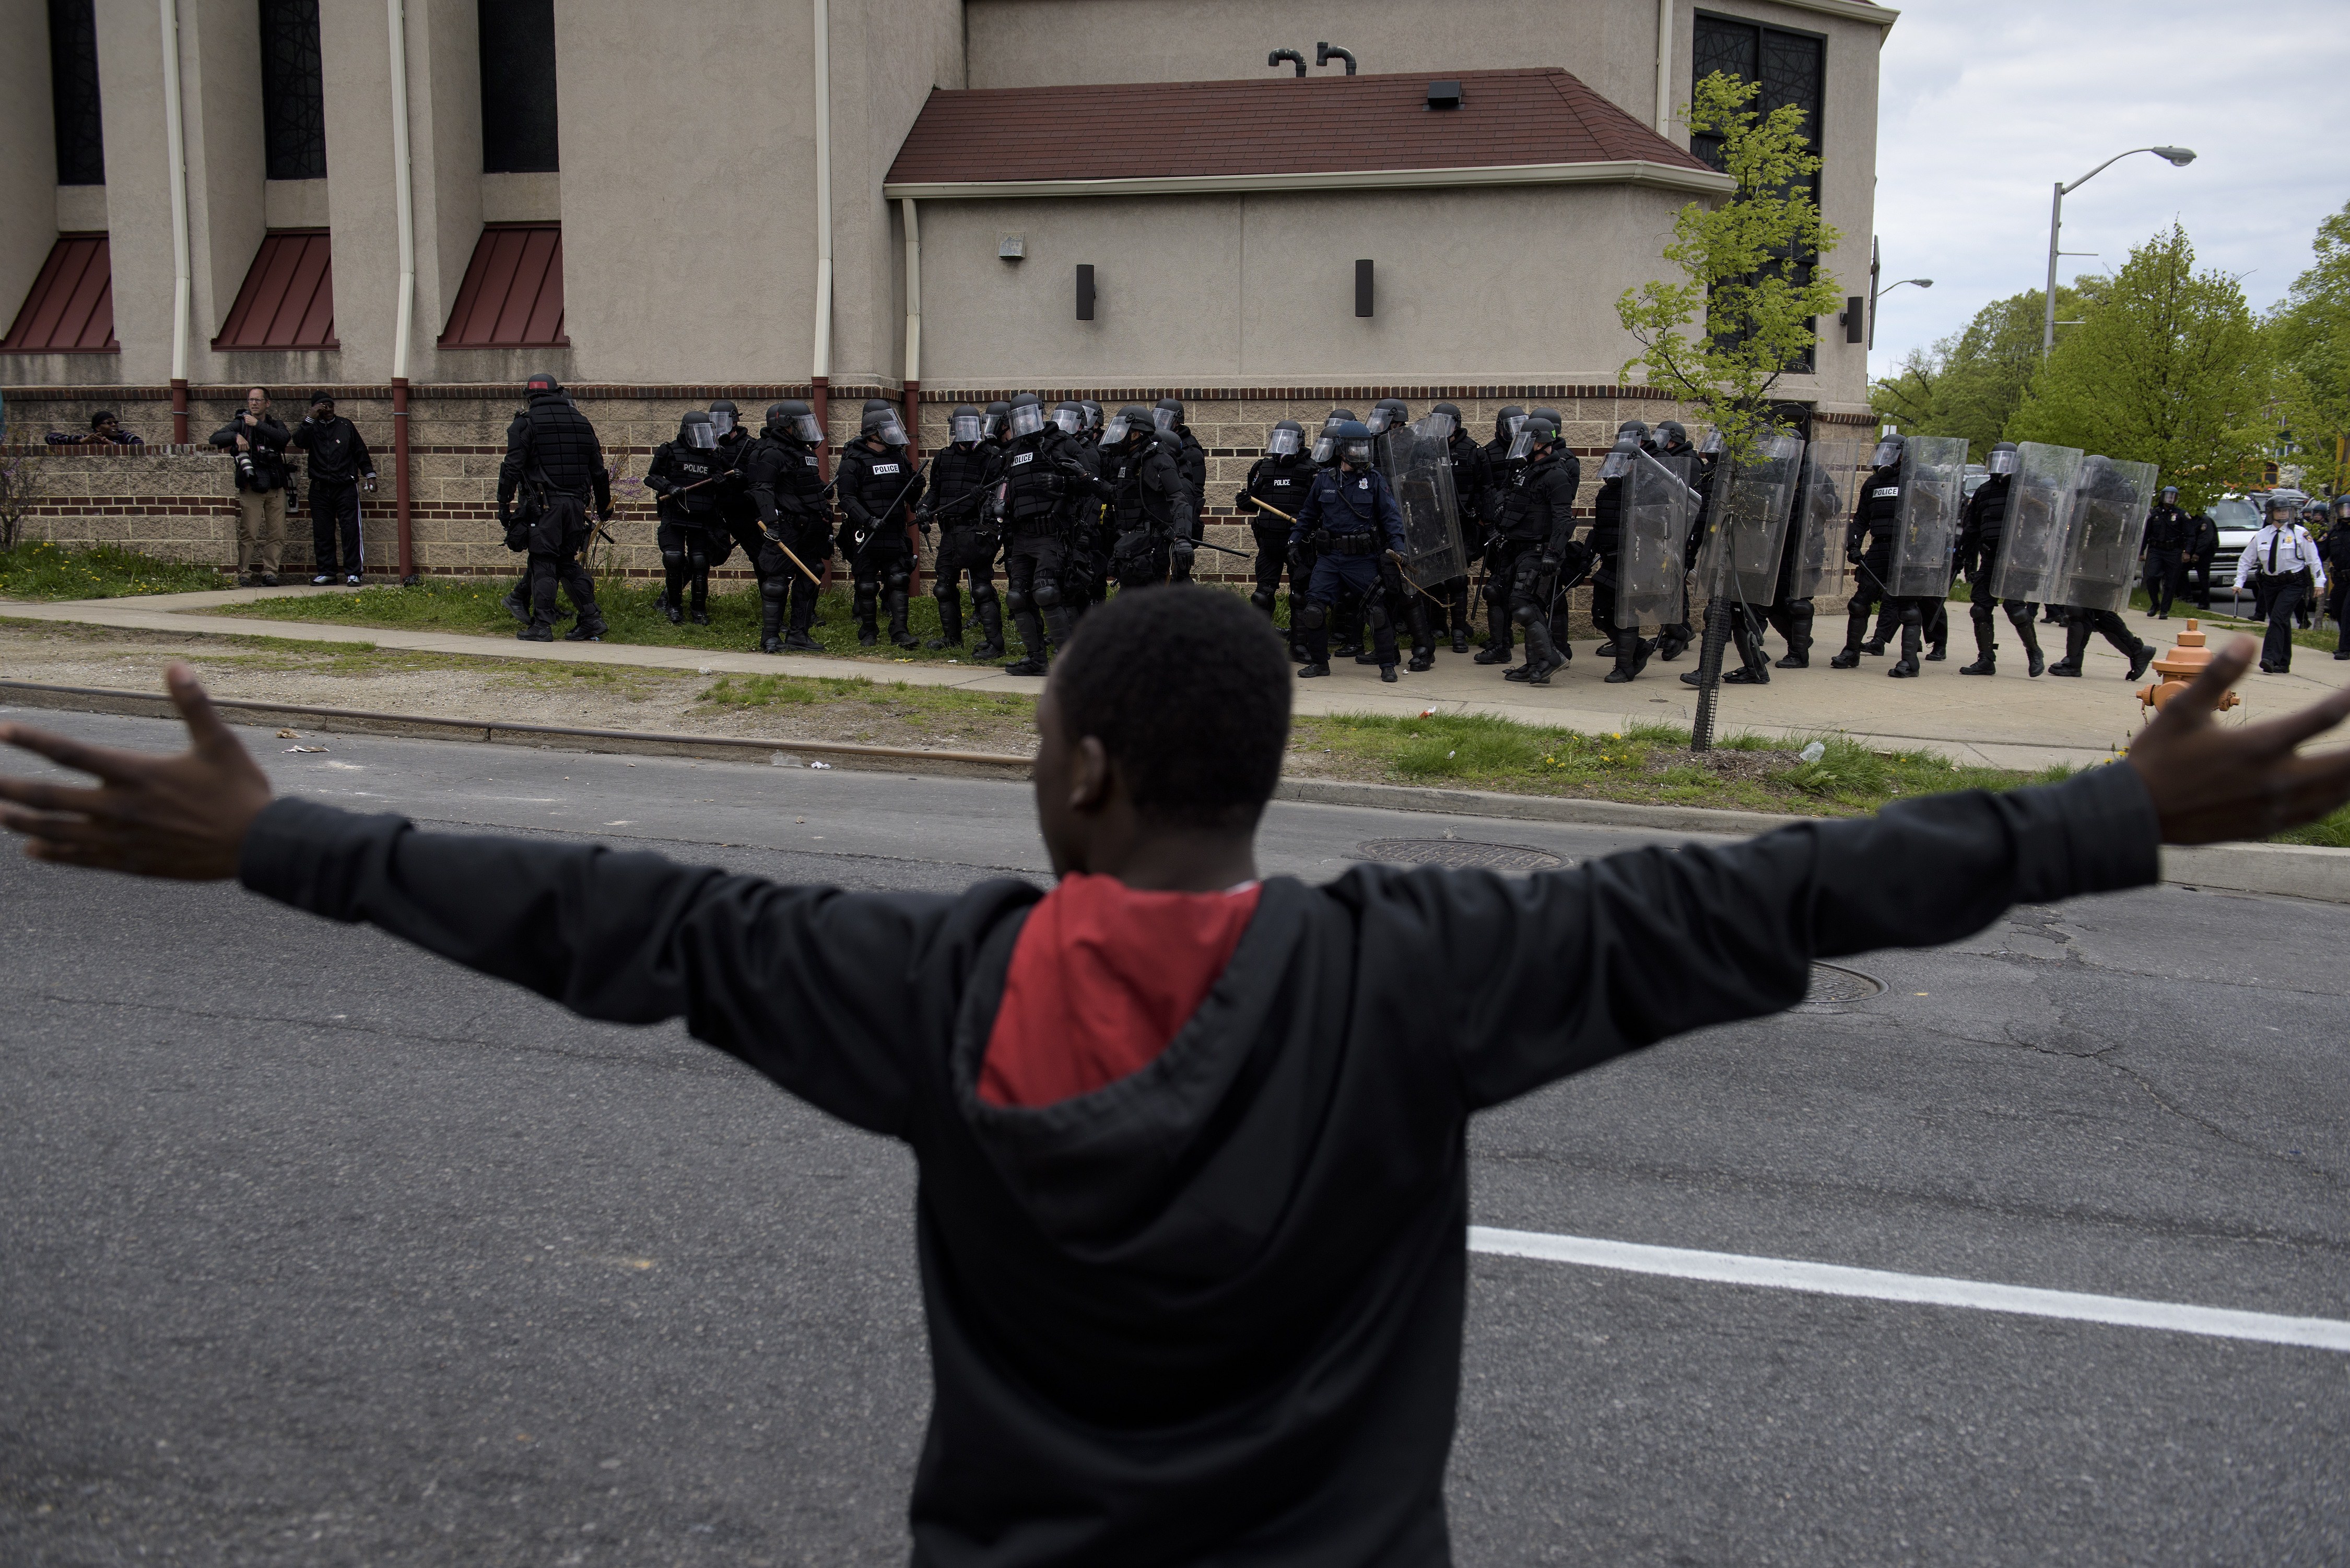 Baltimore police officers form a line in front of protesters in the streets near Mondawmin Mall April 27, 2015 in Baltimore, Maryland. (BRENDAN SMIALOWSKI&mdash;AFP/Getty Images)